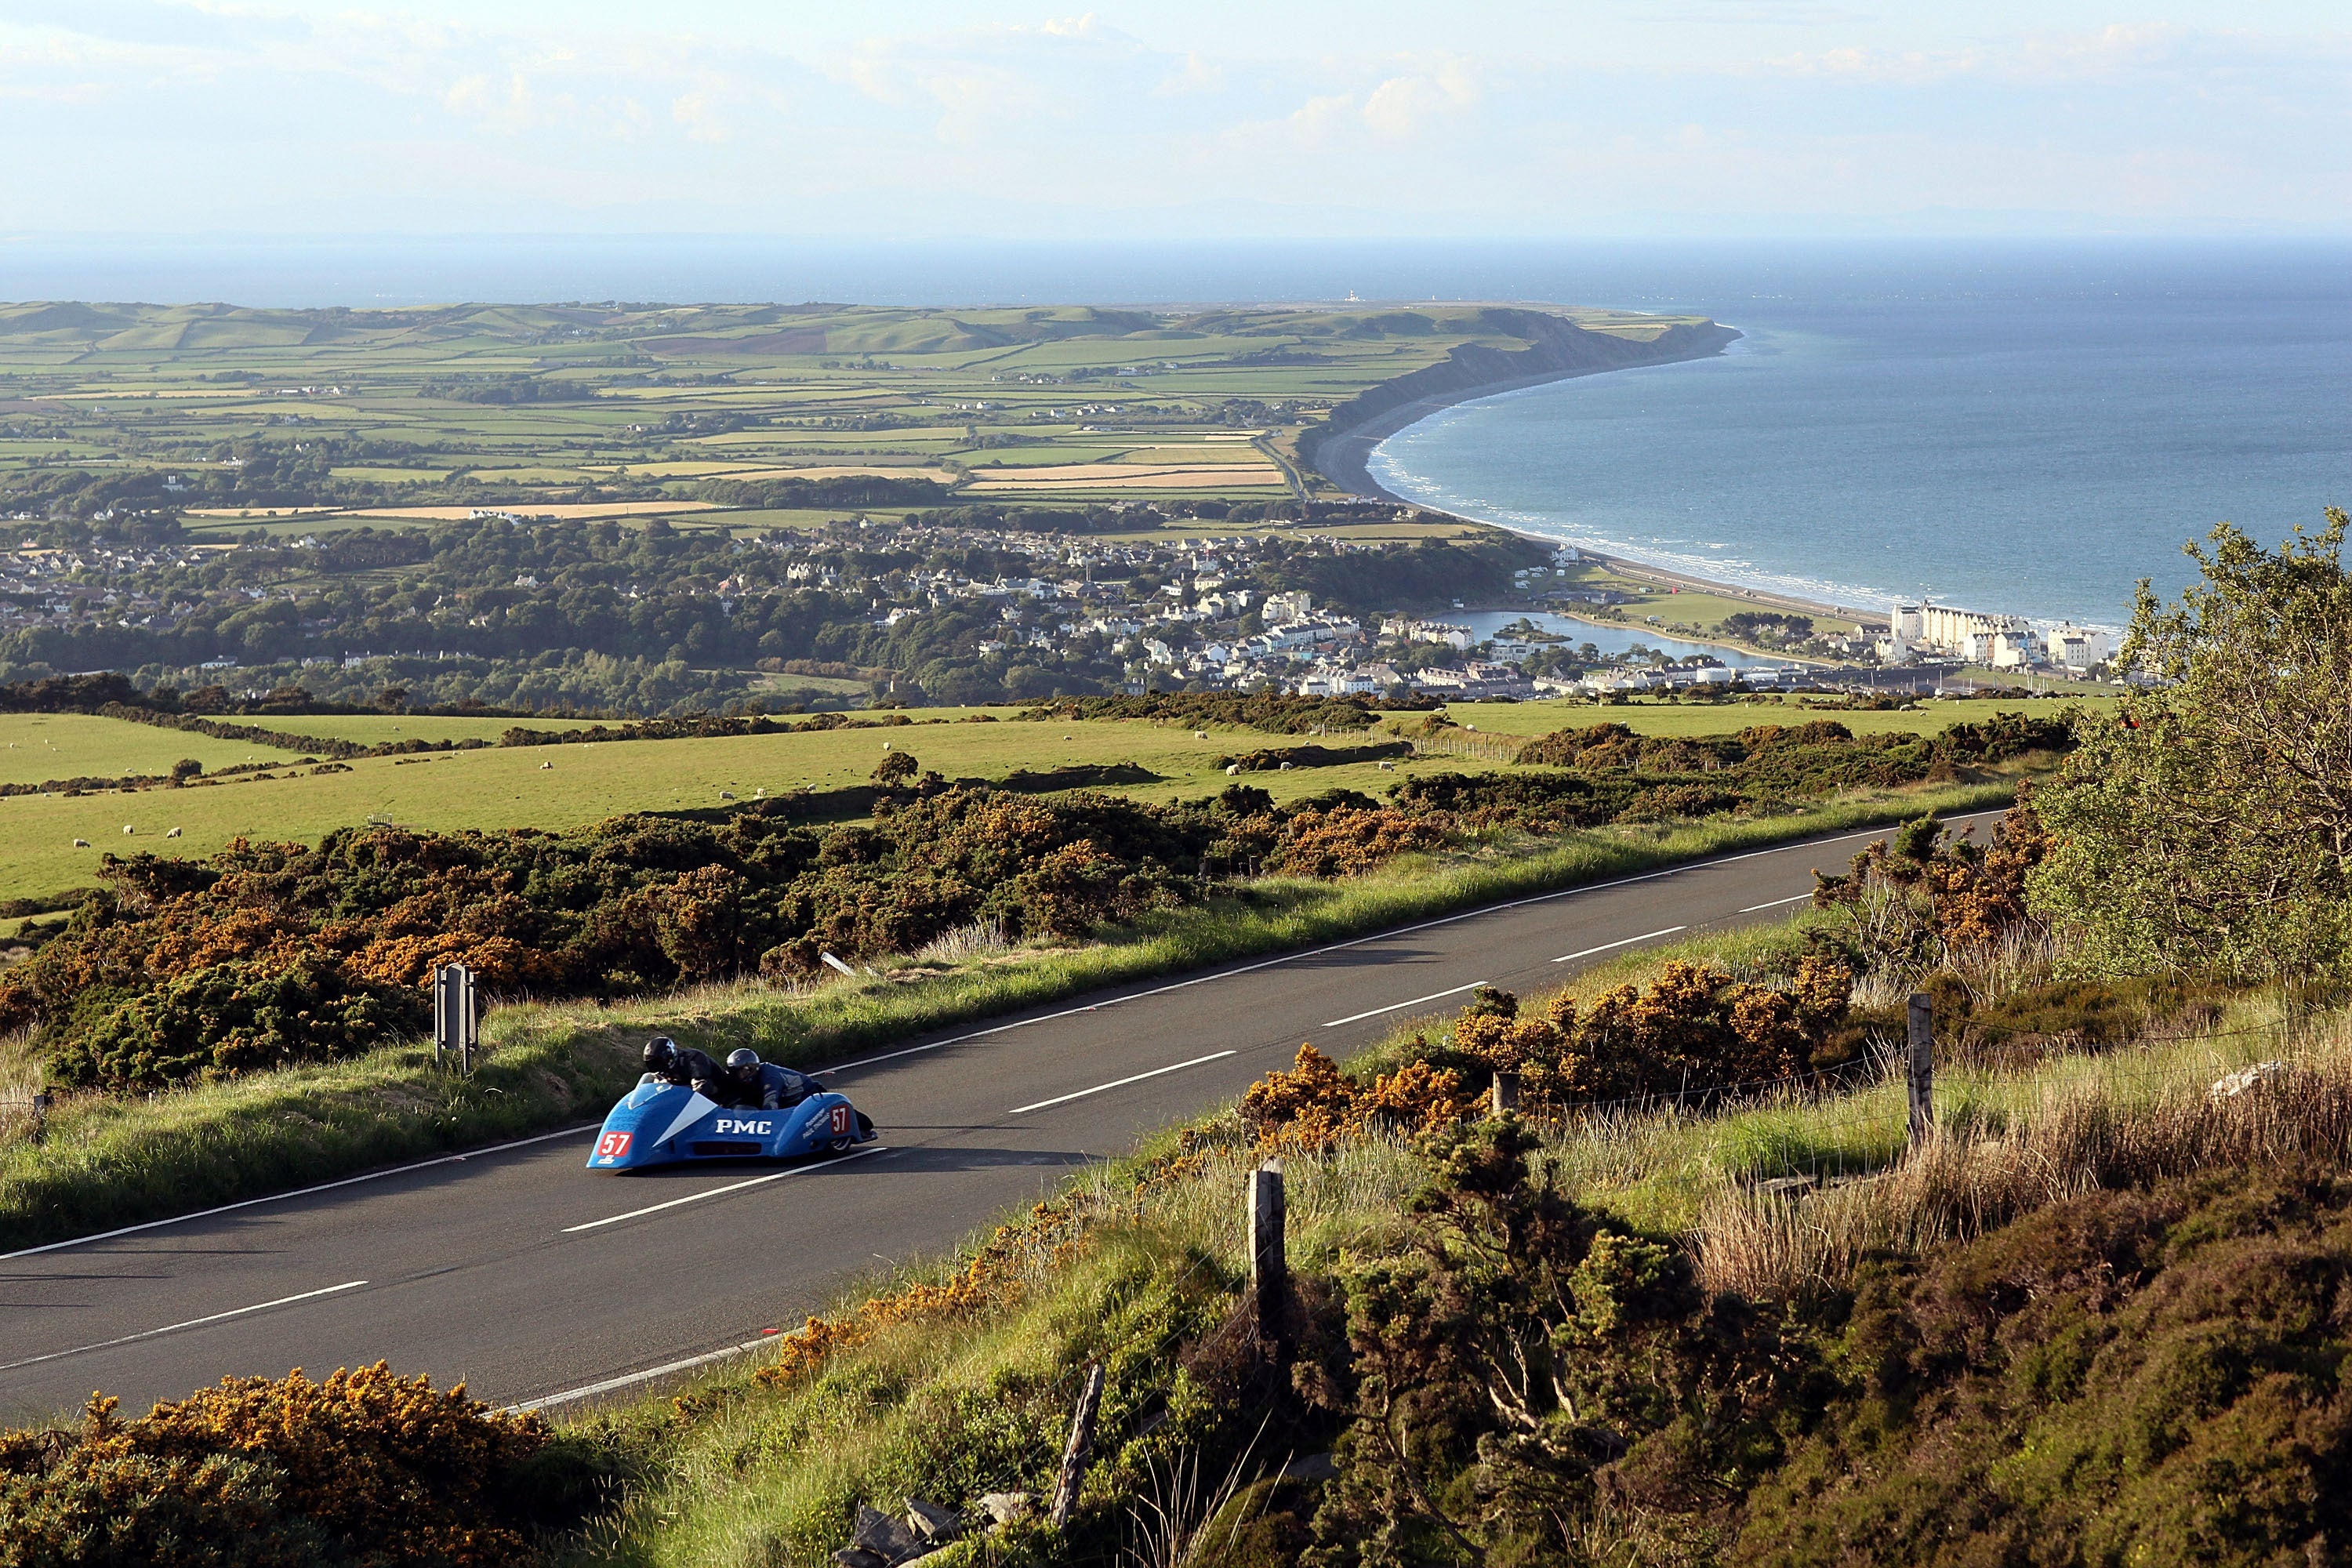 The Isle of Man TT begins on Monday 29 May